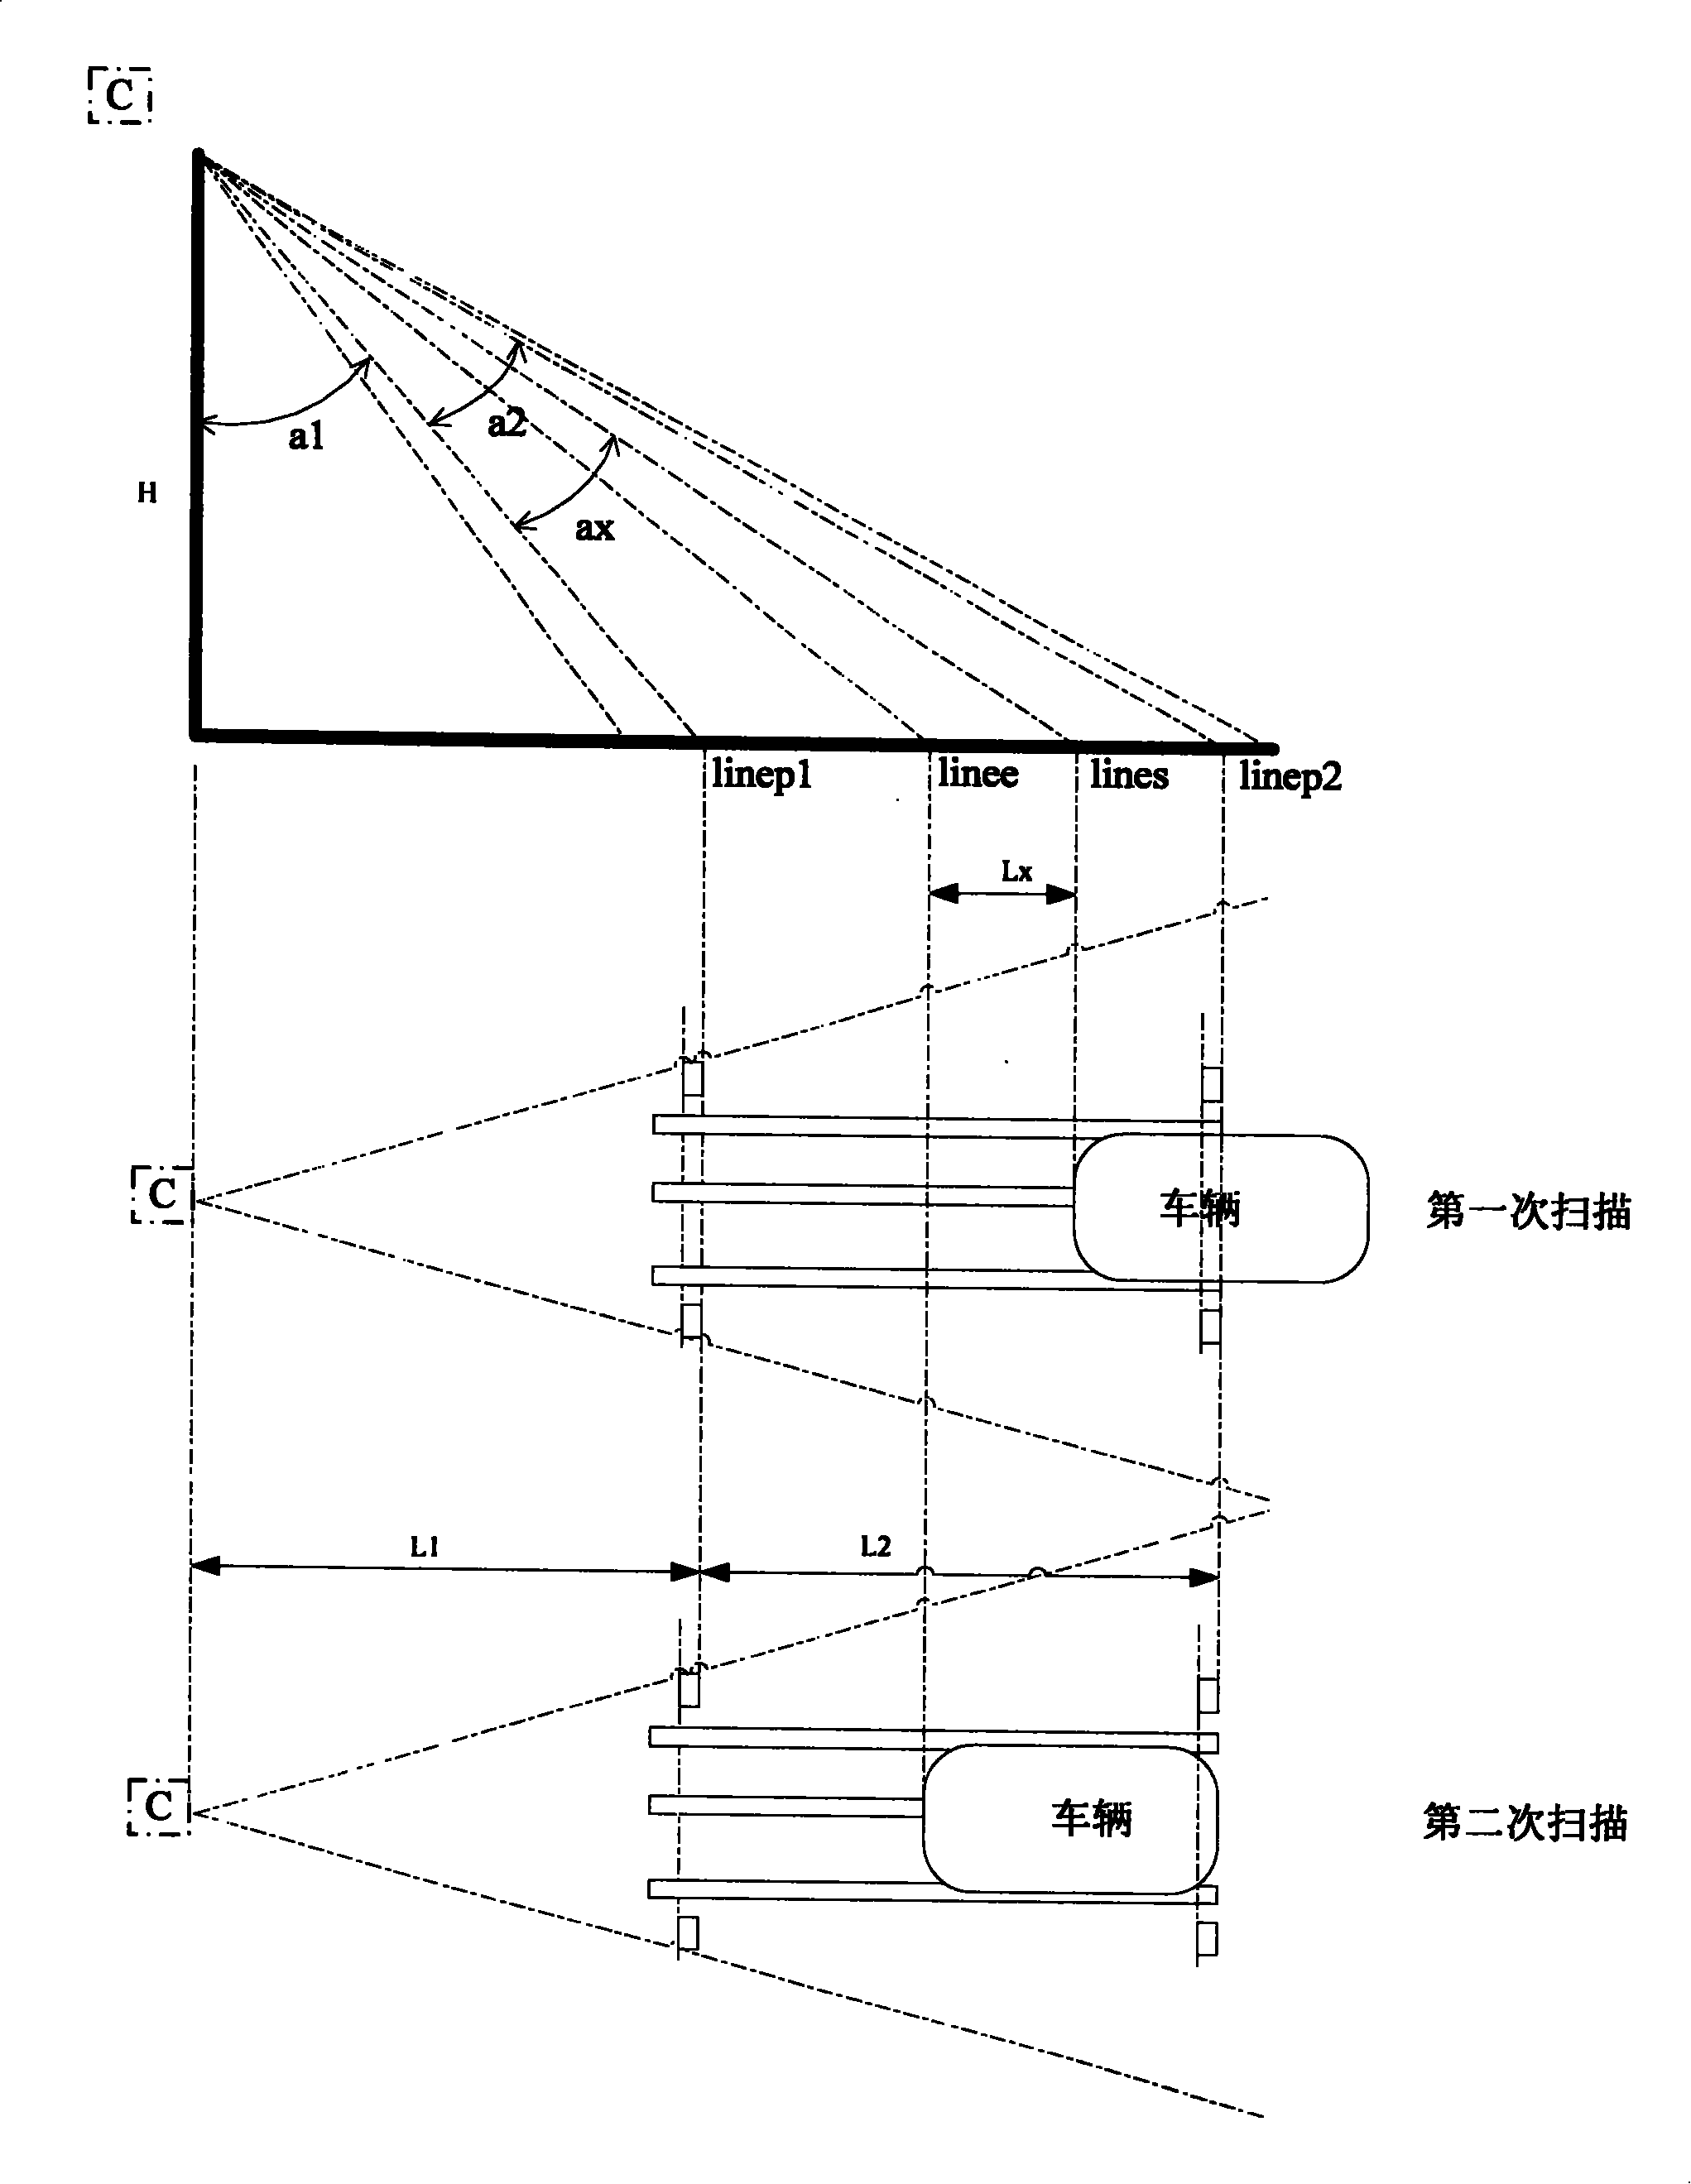 Method for obtaining vehicle speed accurately with video mode